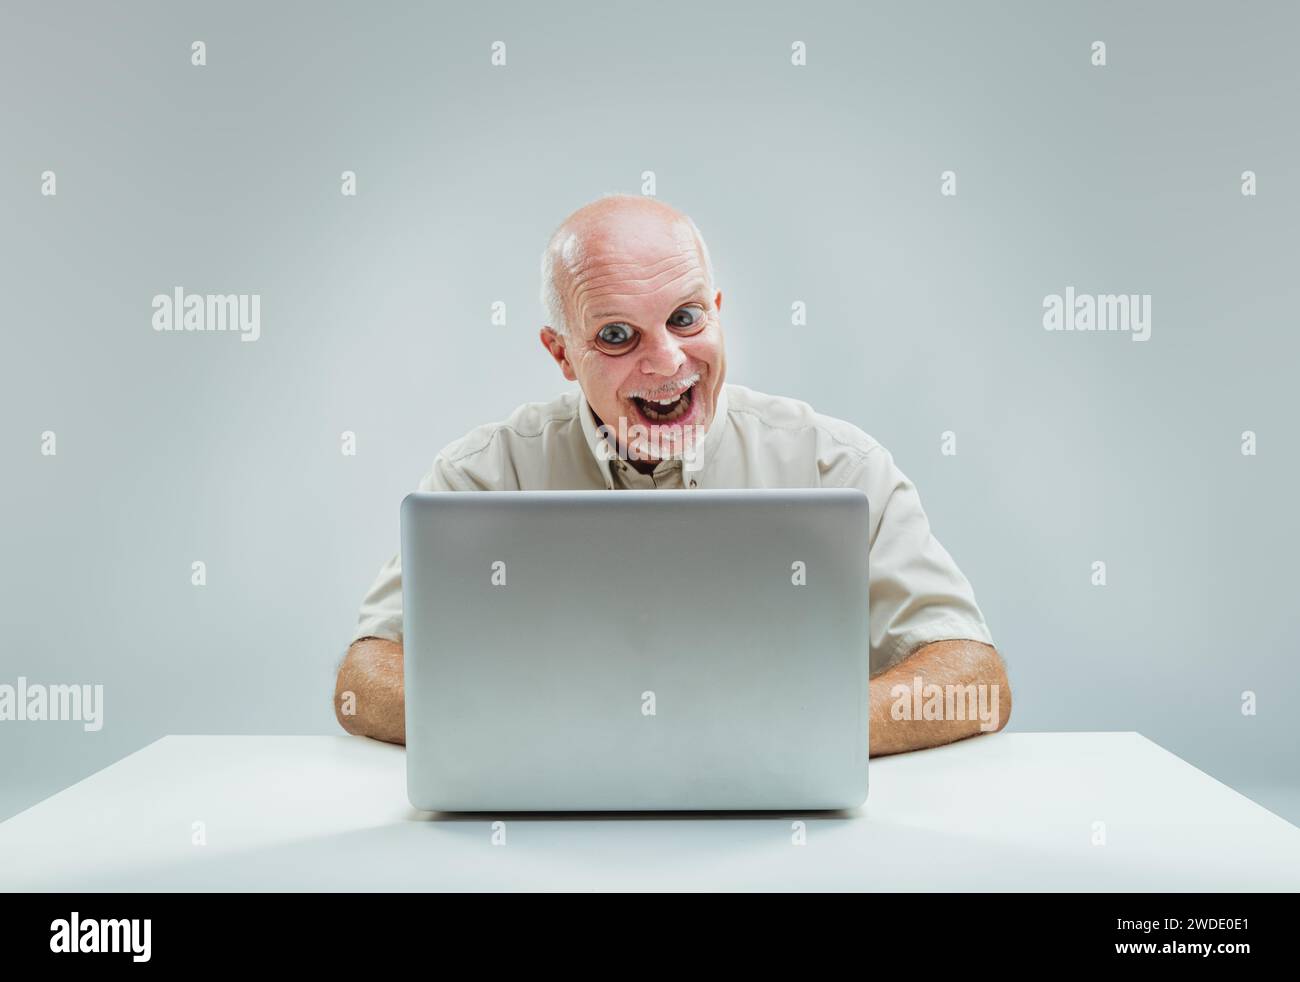 Man's gleeful expression while looking at laptop suggests he's found something delightfully tempting Stock Photo